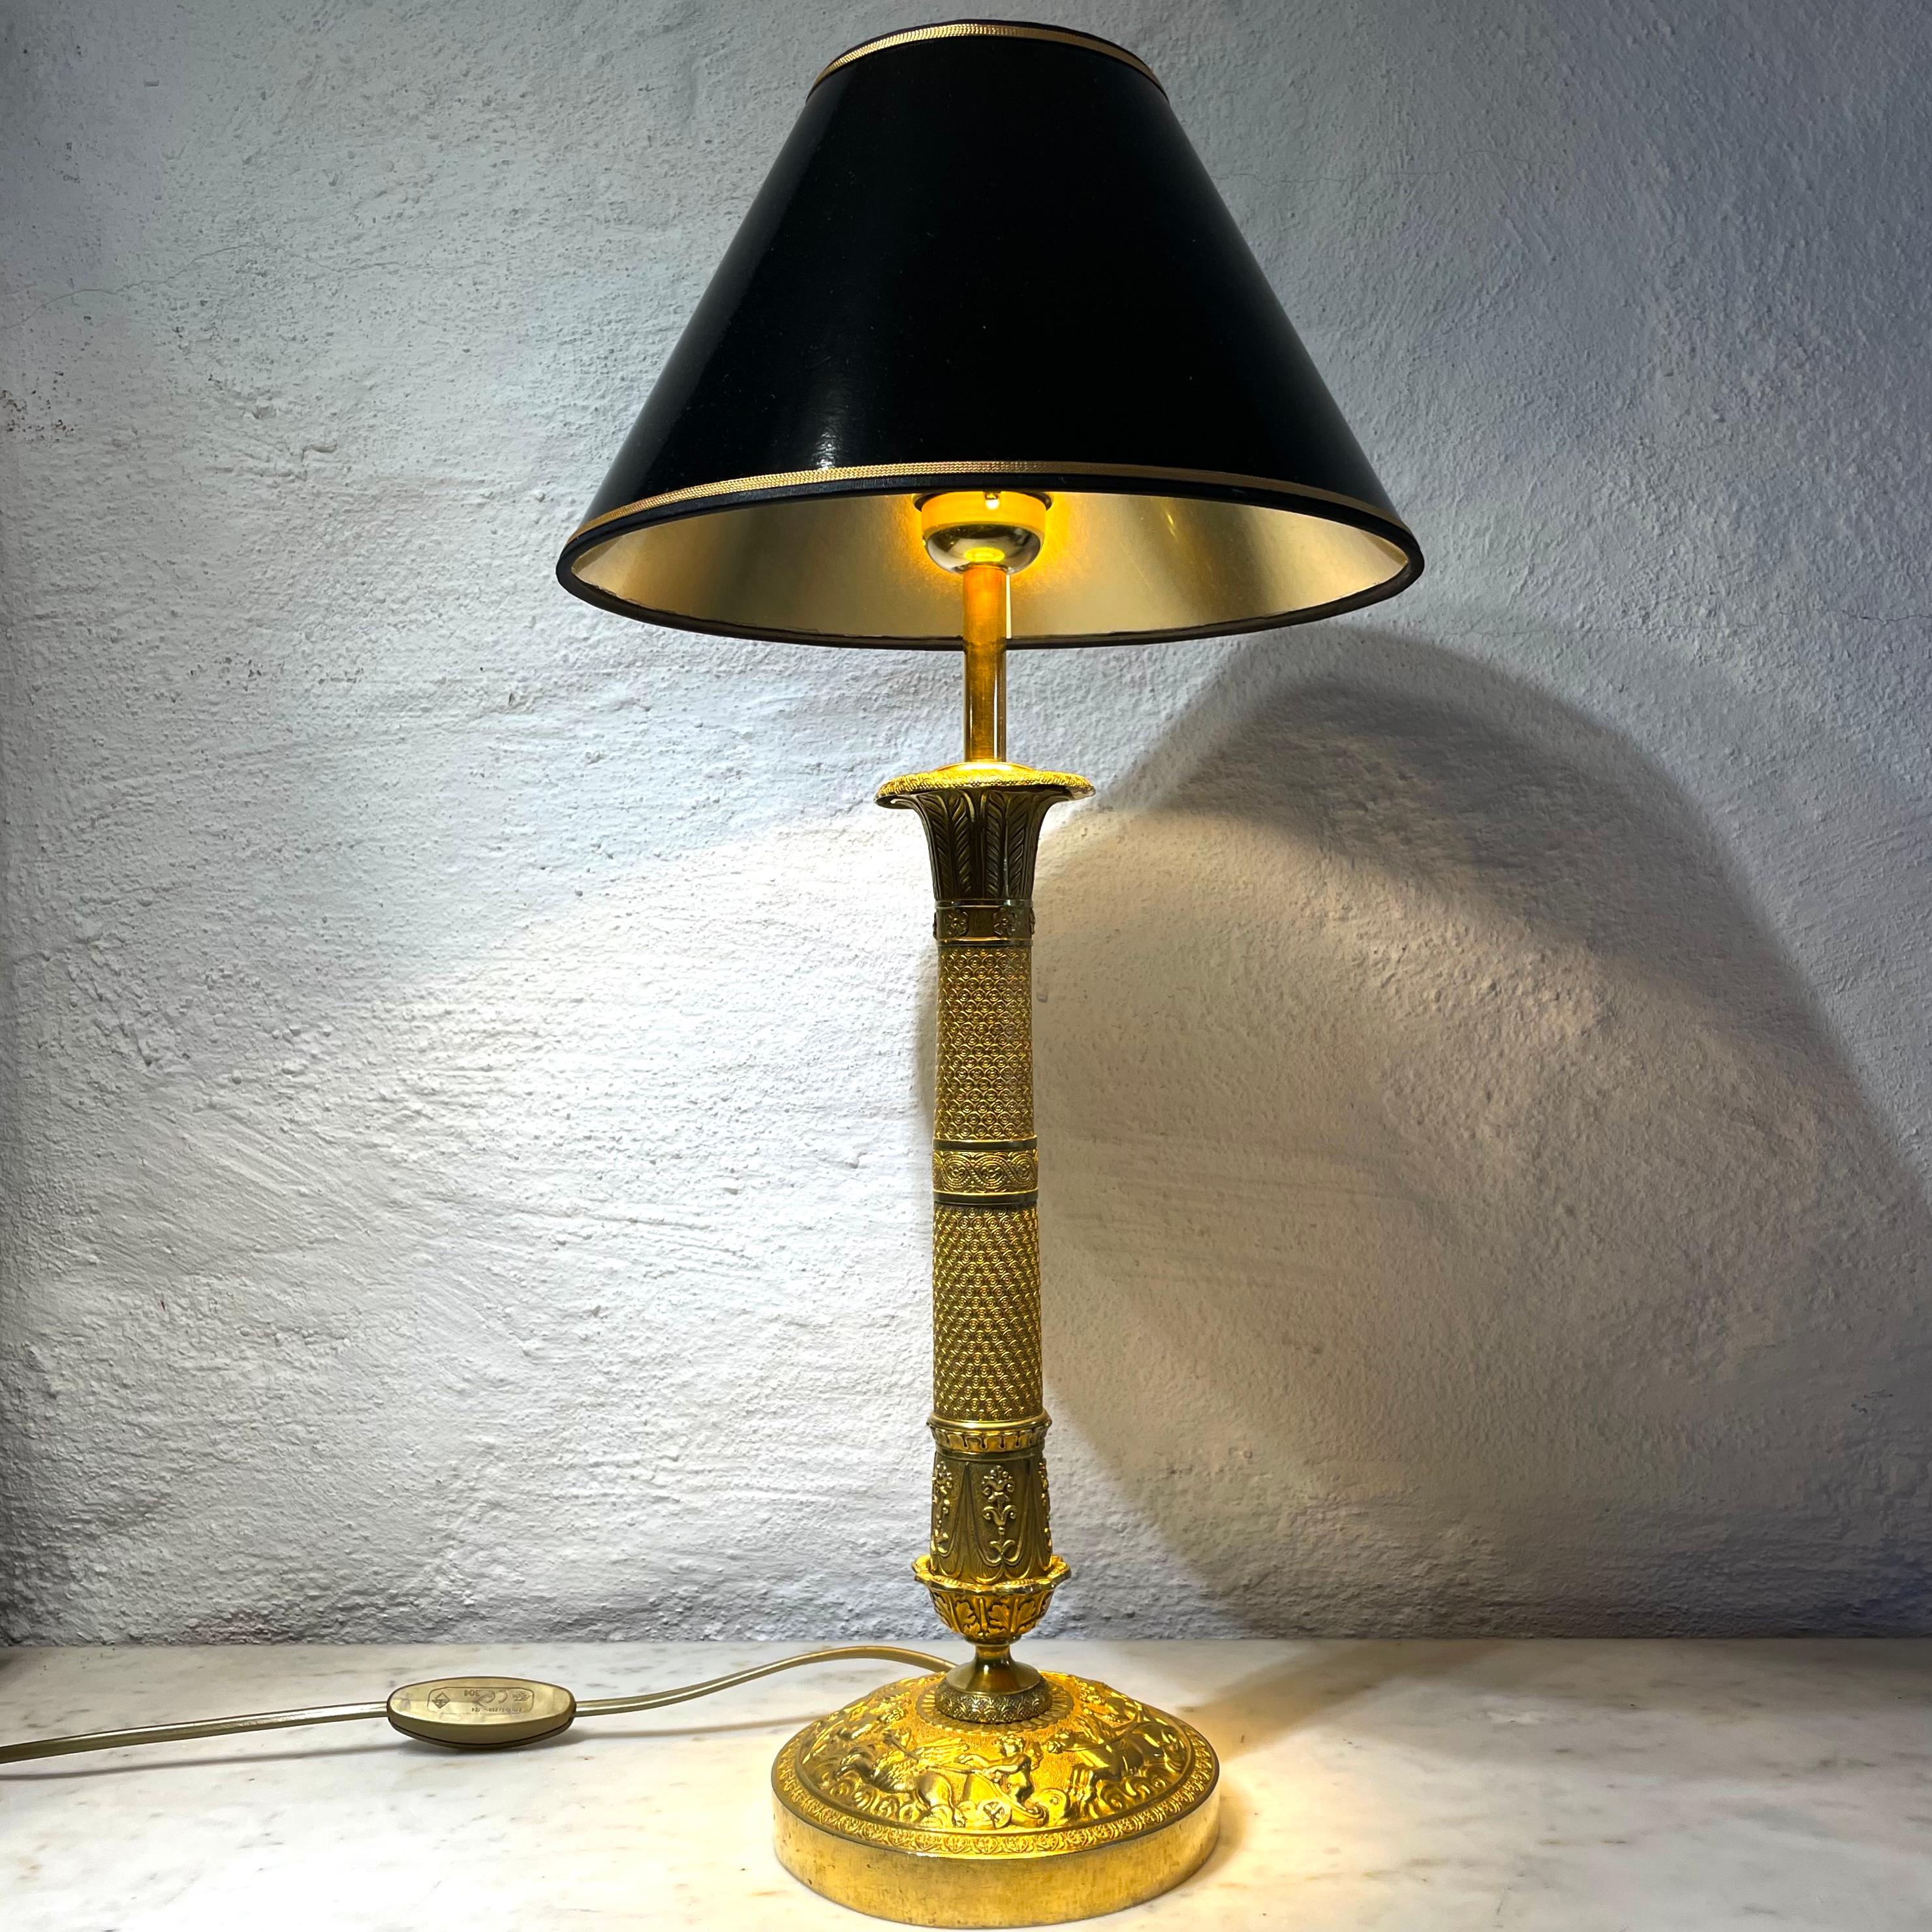 French Table Lamp in Gilded Bronze, Originally an Empire Candlestick from the 1820s